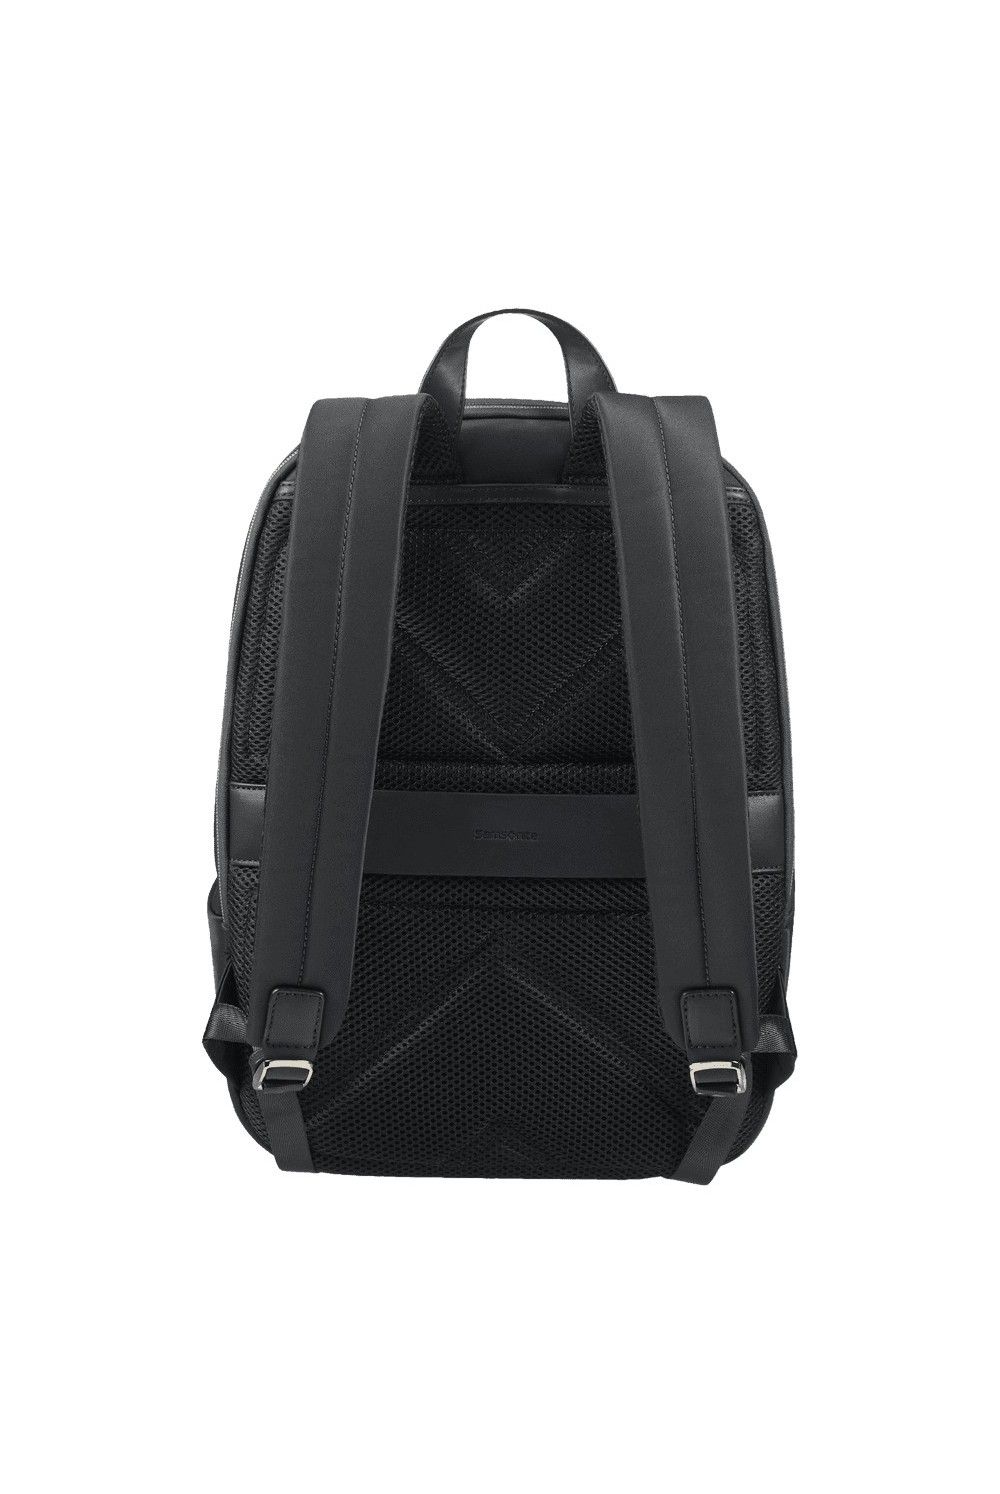 backpack Wave Eco 15.6 inches Samsonite Laptop